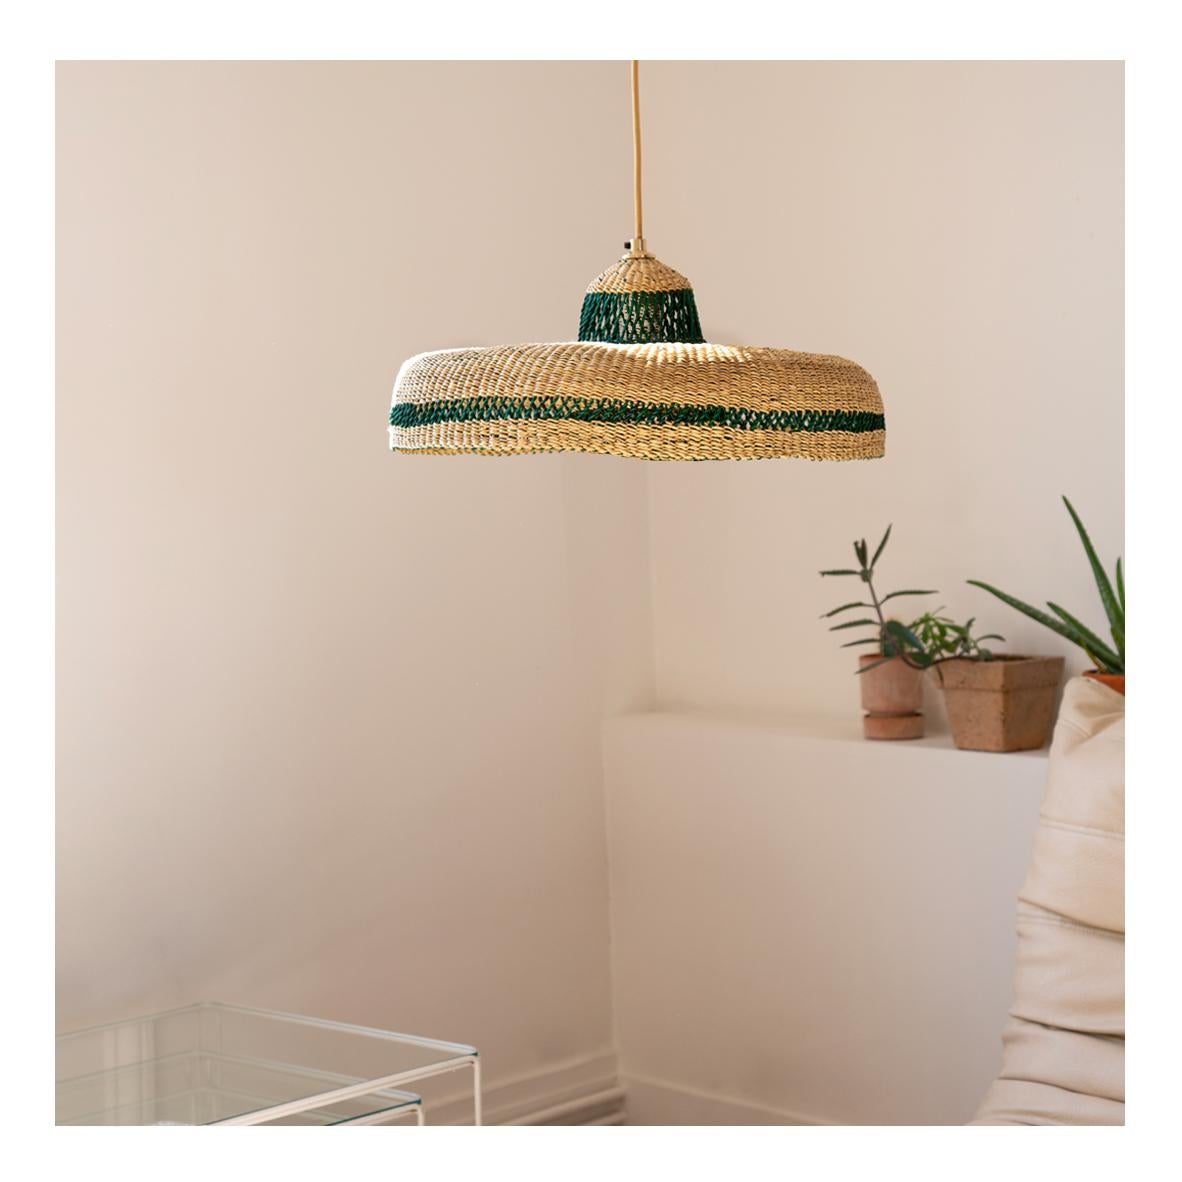 Medium Woven Pendant Lamp HATTER : 
Pure natural
Colour: Natural and Herb (Bottle Green)

Are you looking for a modernistic natural hub for your room? We can offer you that with this medium pendant lamp that perfectly balances the earthy,